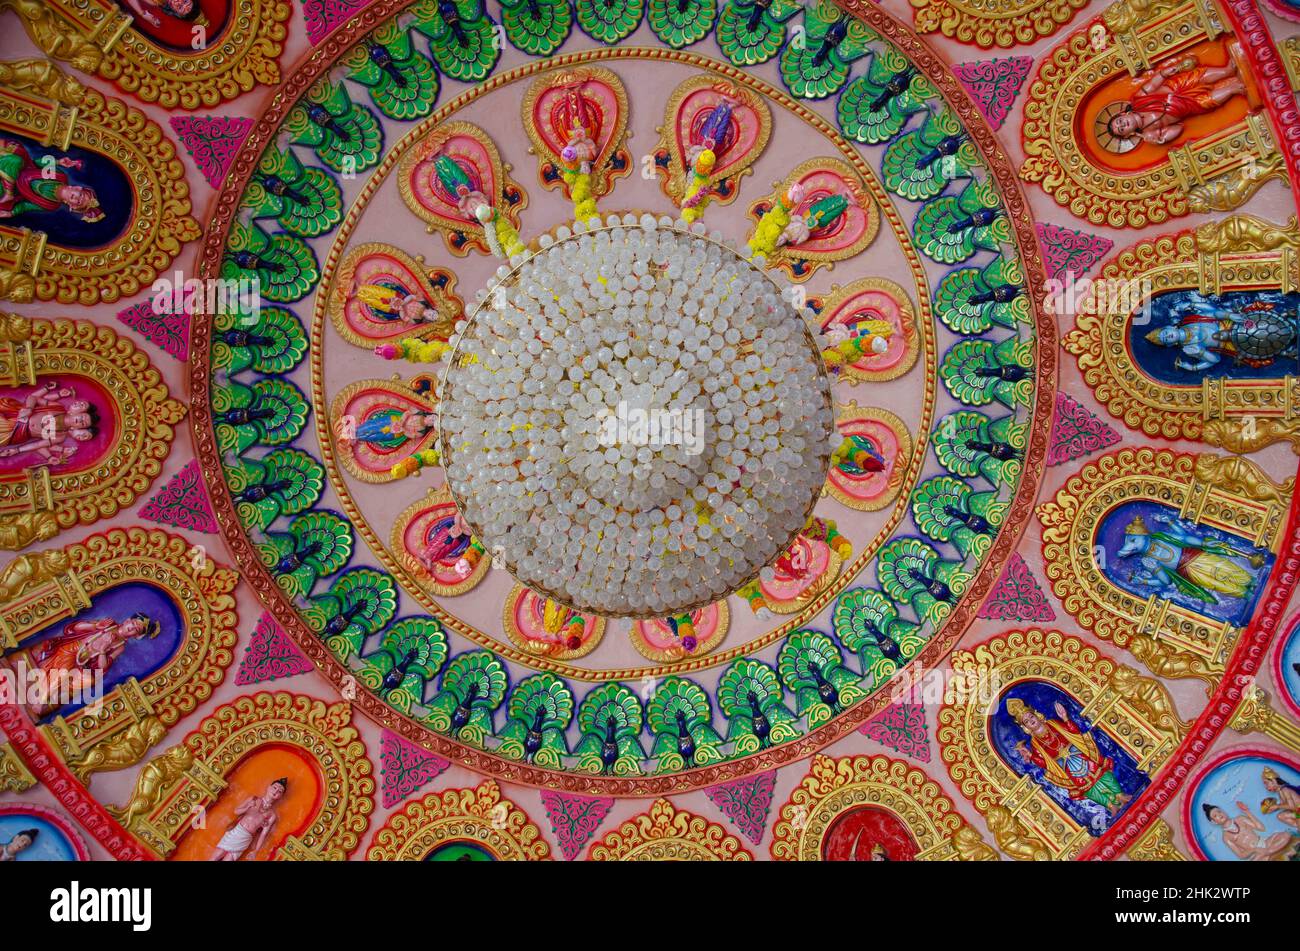 Interior ceiling of Swaminarayan temple with gods, deities and dancing figures carved on the same. Nilkanthdham, Poicha, Gujarat, India Stock Photo